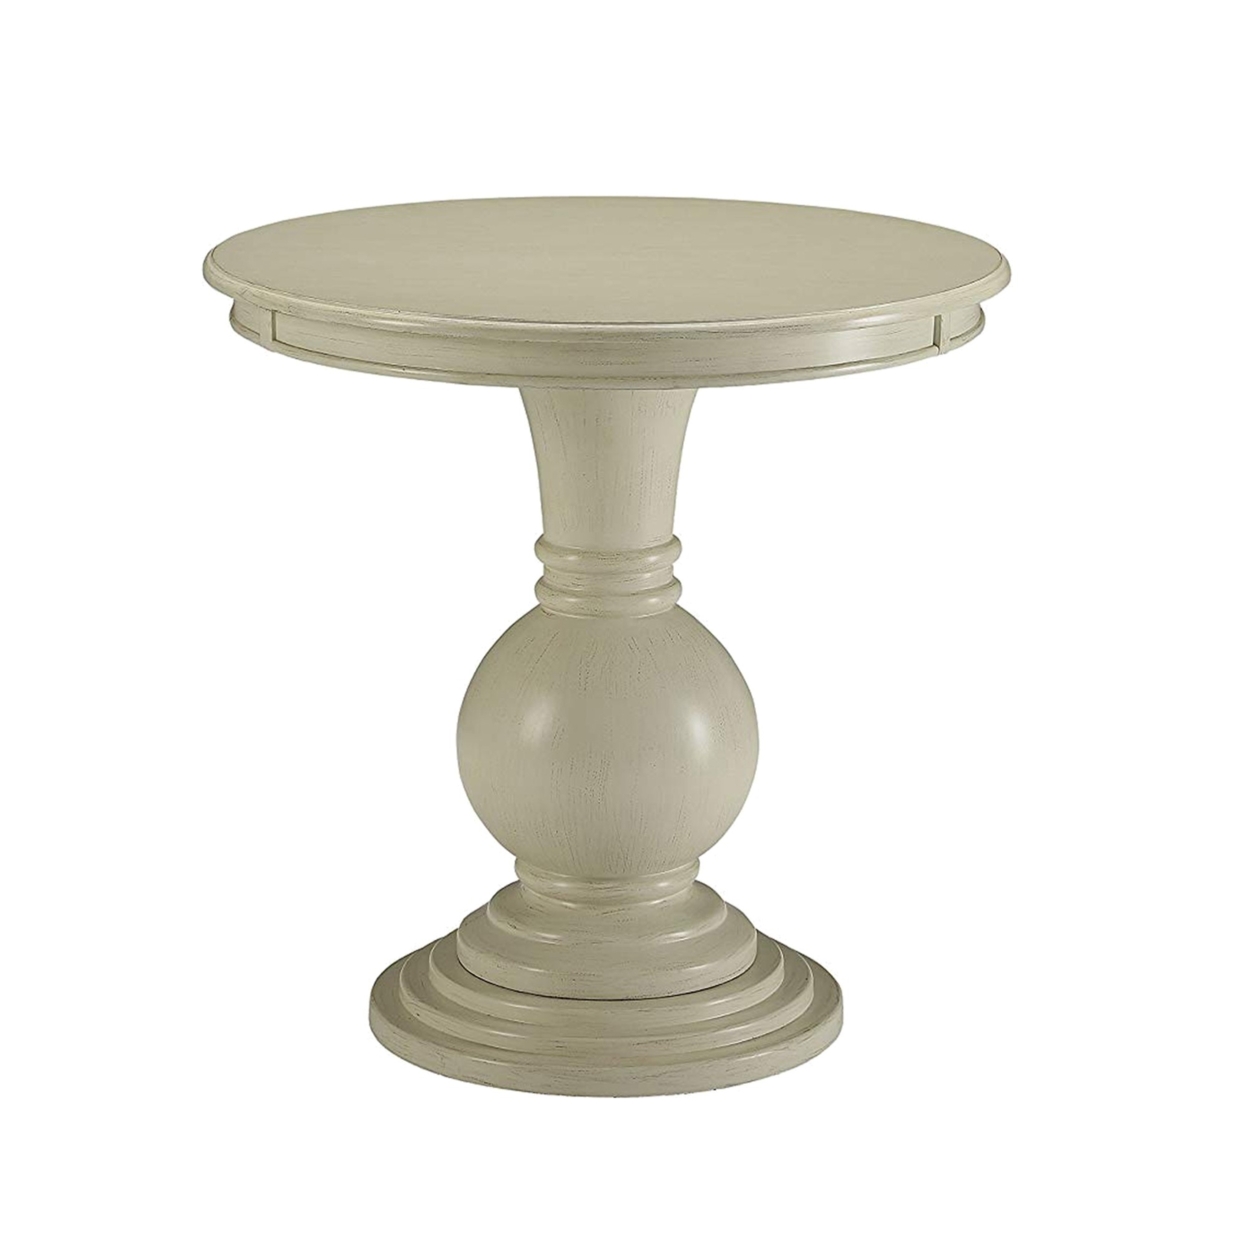 Wooden Accent Table With Pedestal Base, Antique White- Saltoro Sherpi